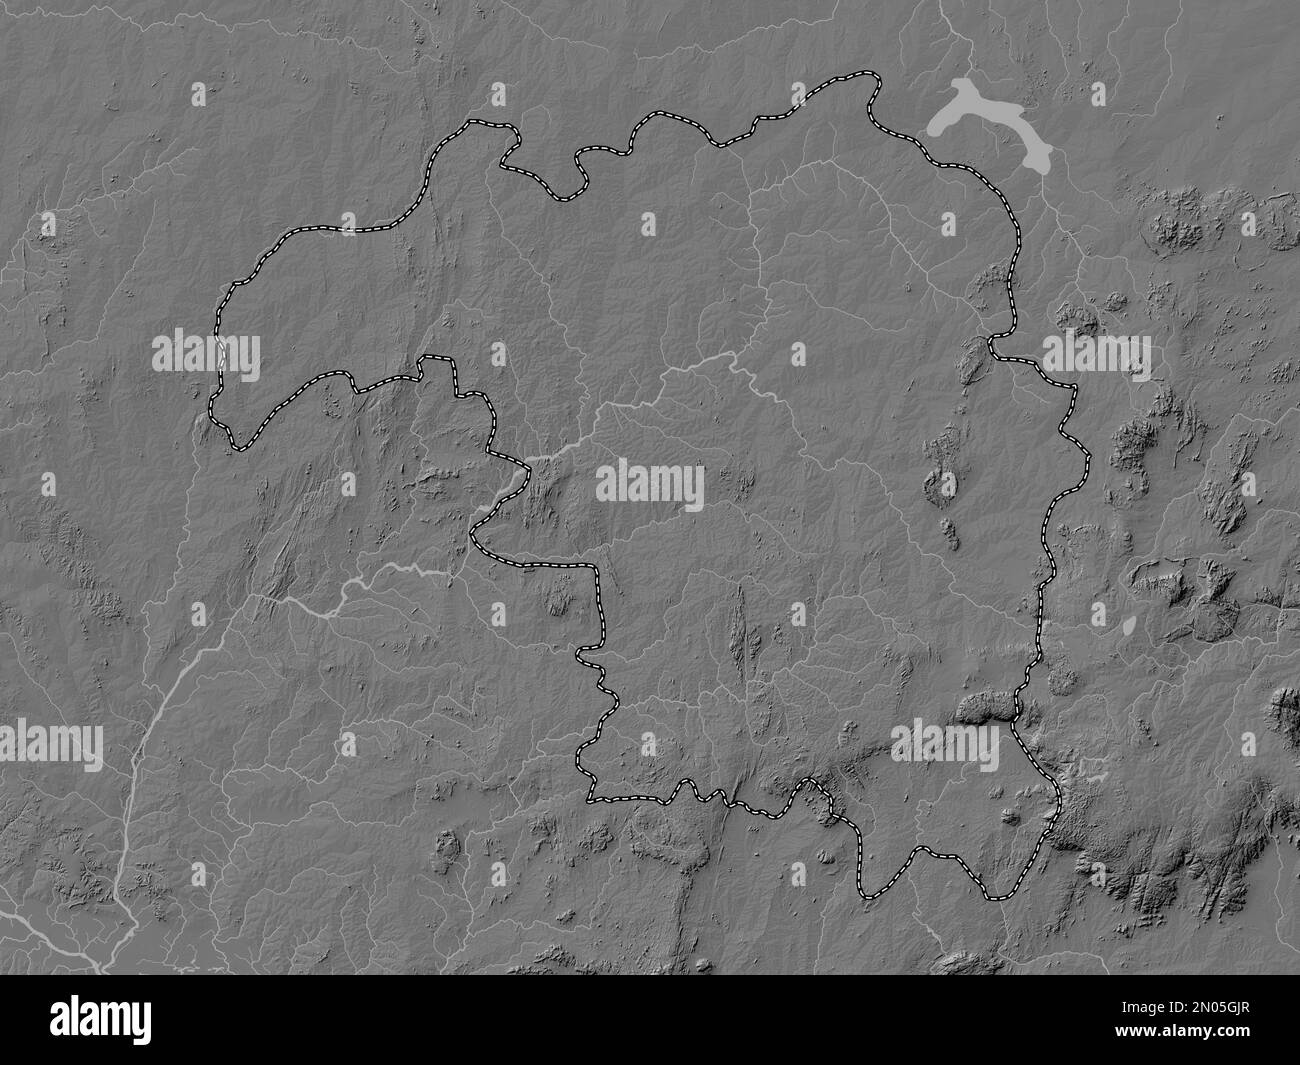 Kaduna, state of Nigeria. Bilevel elevation map with lakes and rivers Stock Photo